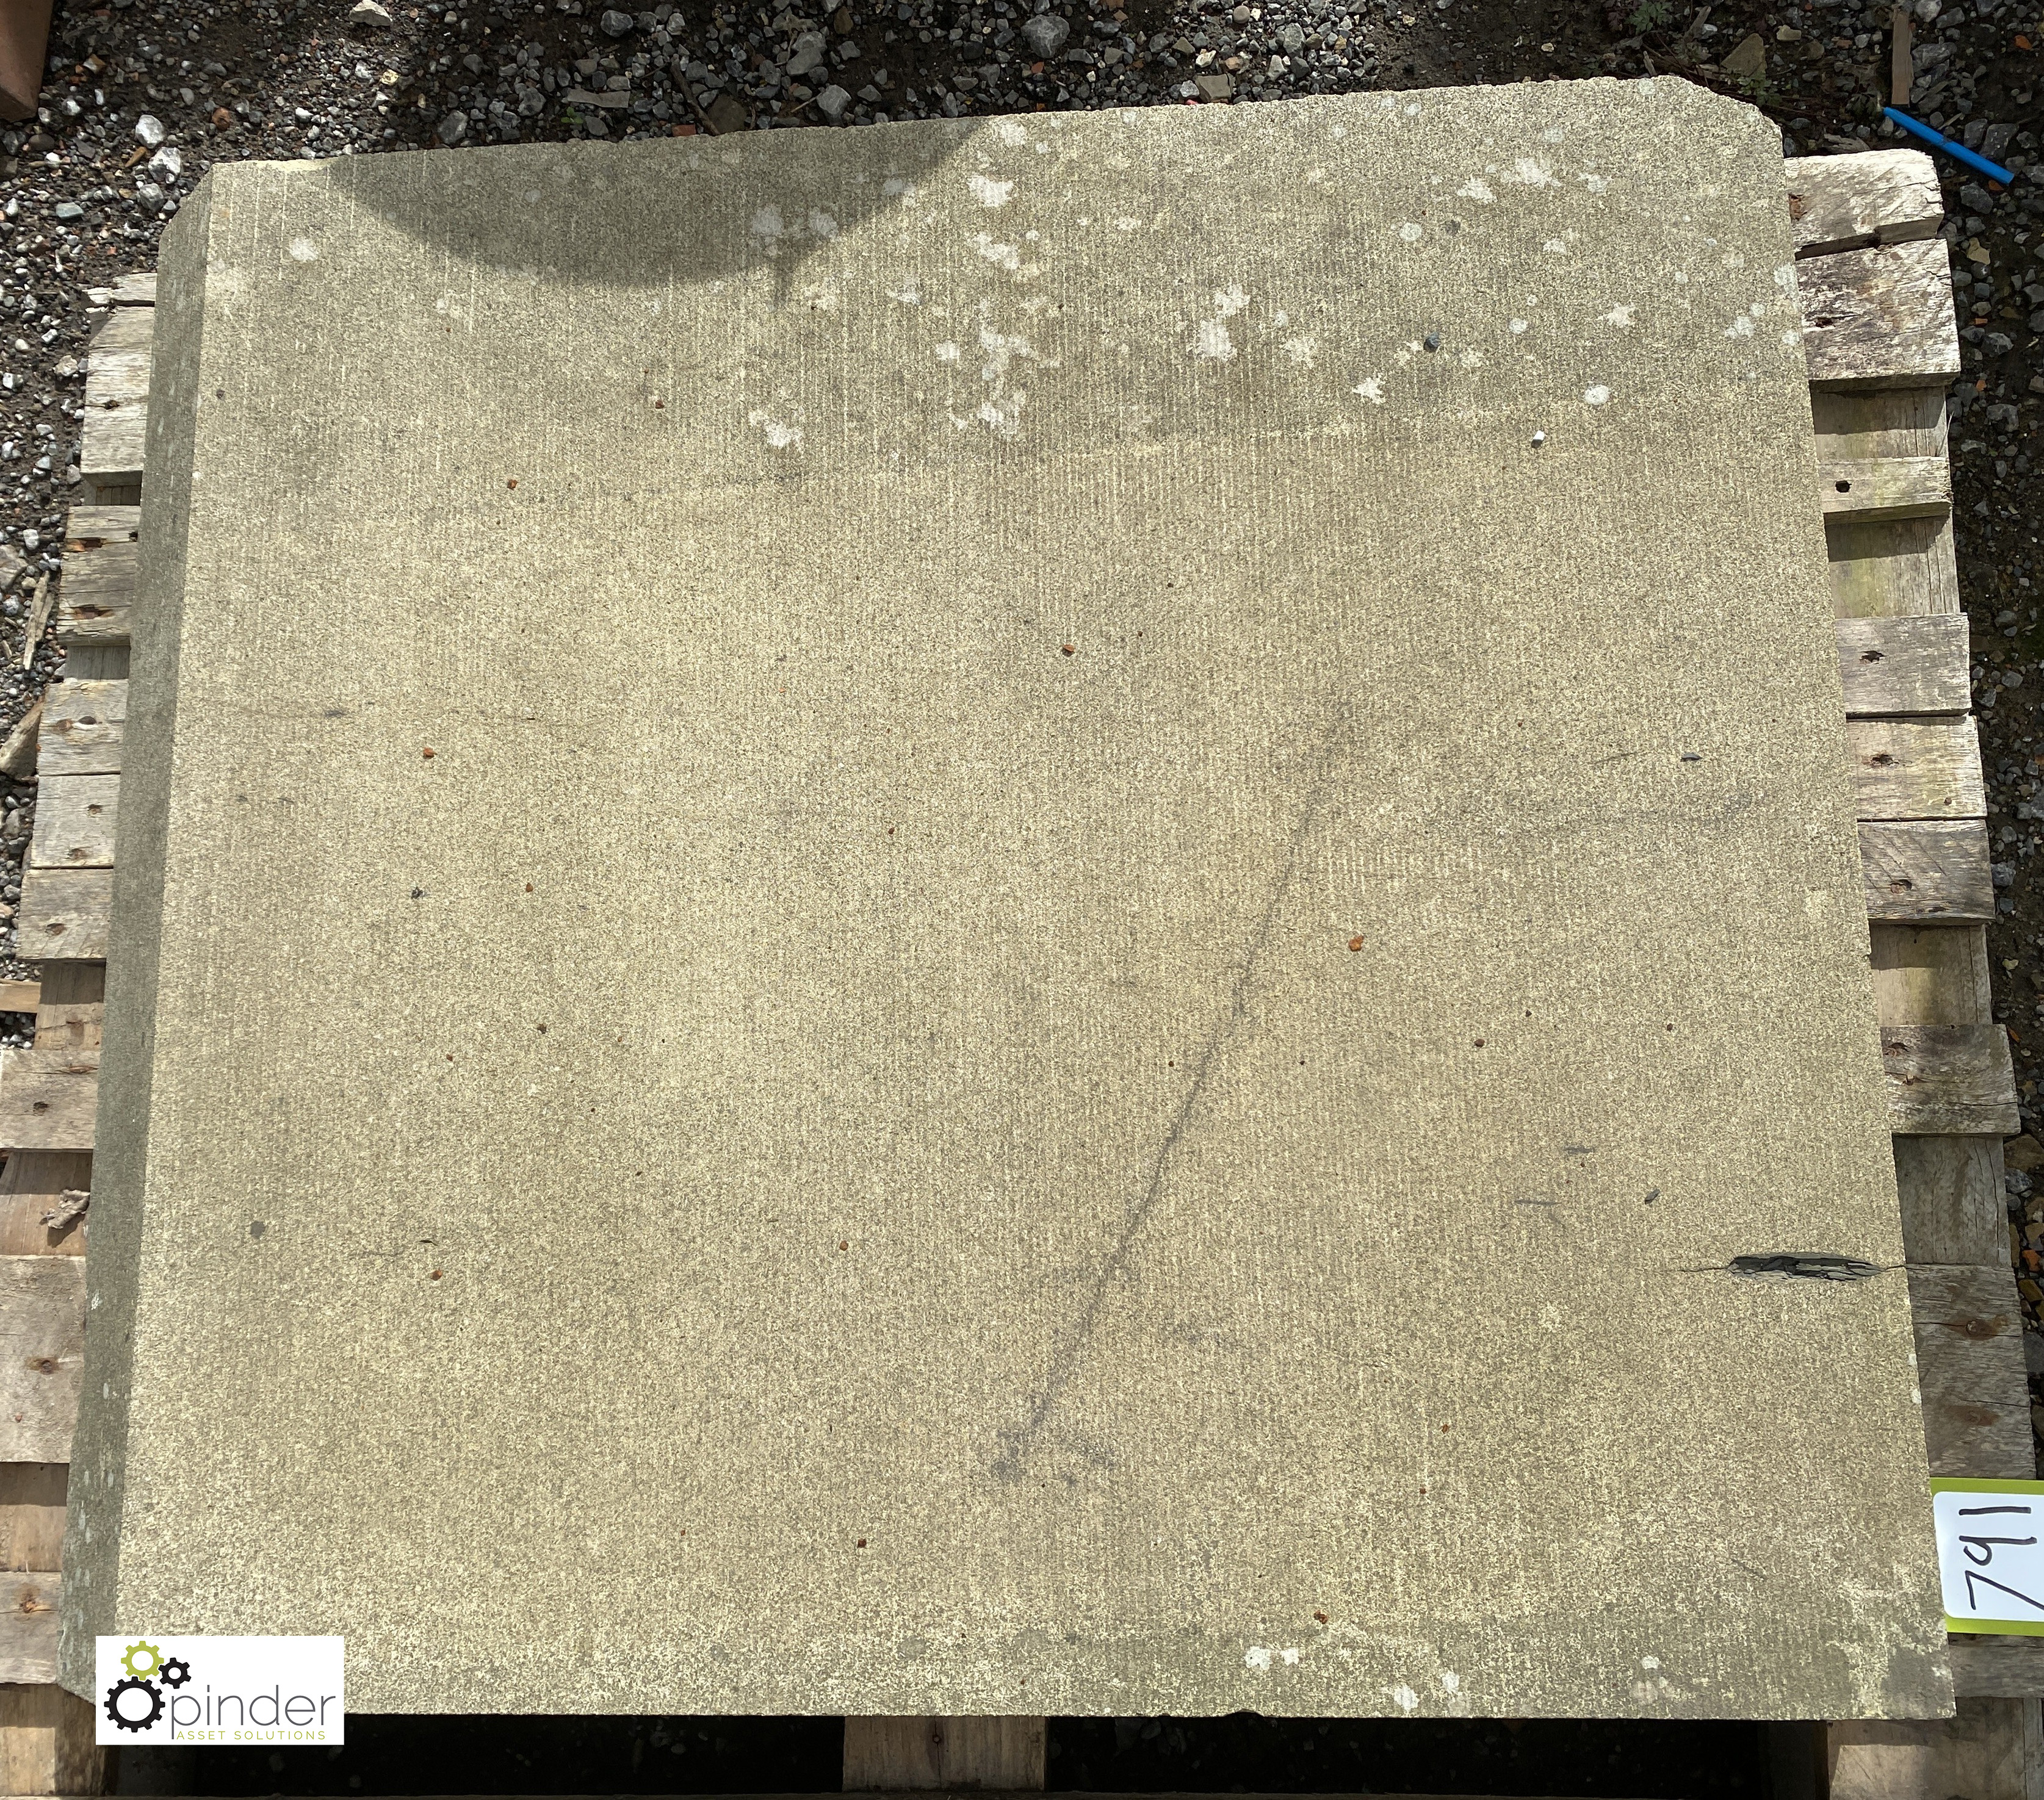 A Yorkshire Stone Doorstep, circa early 1900s, 3.5in high x 29in wide x 33in long